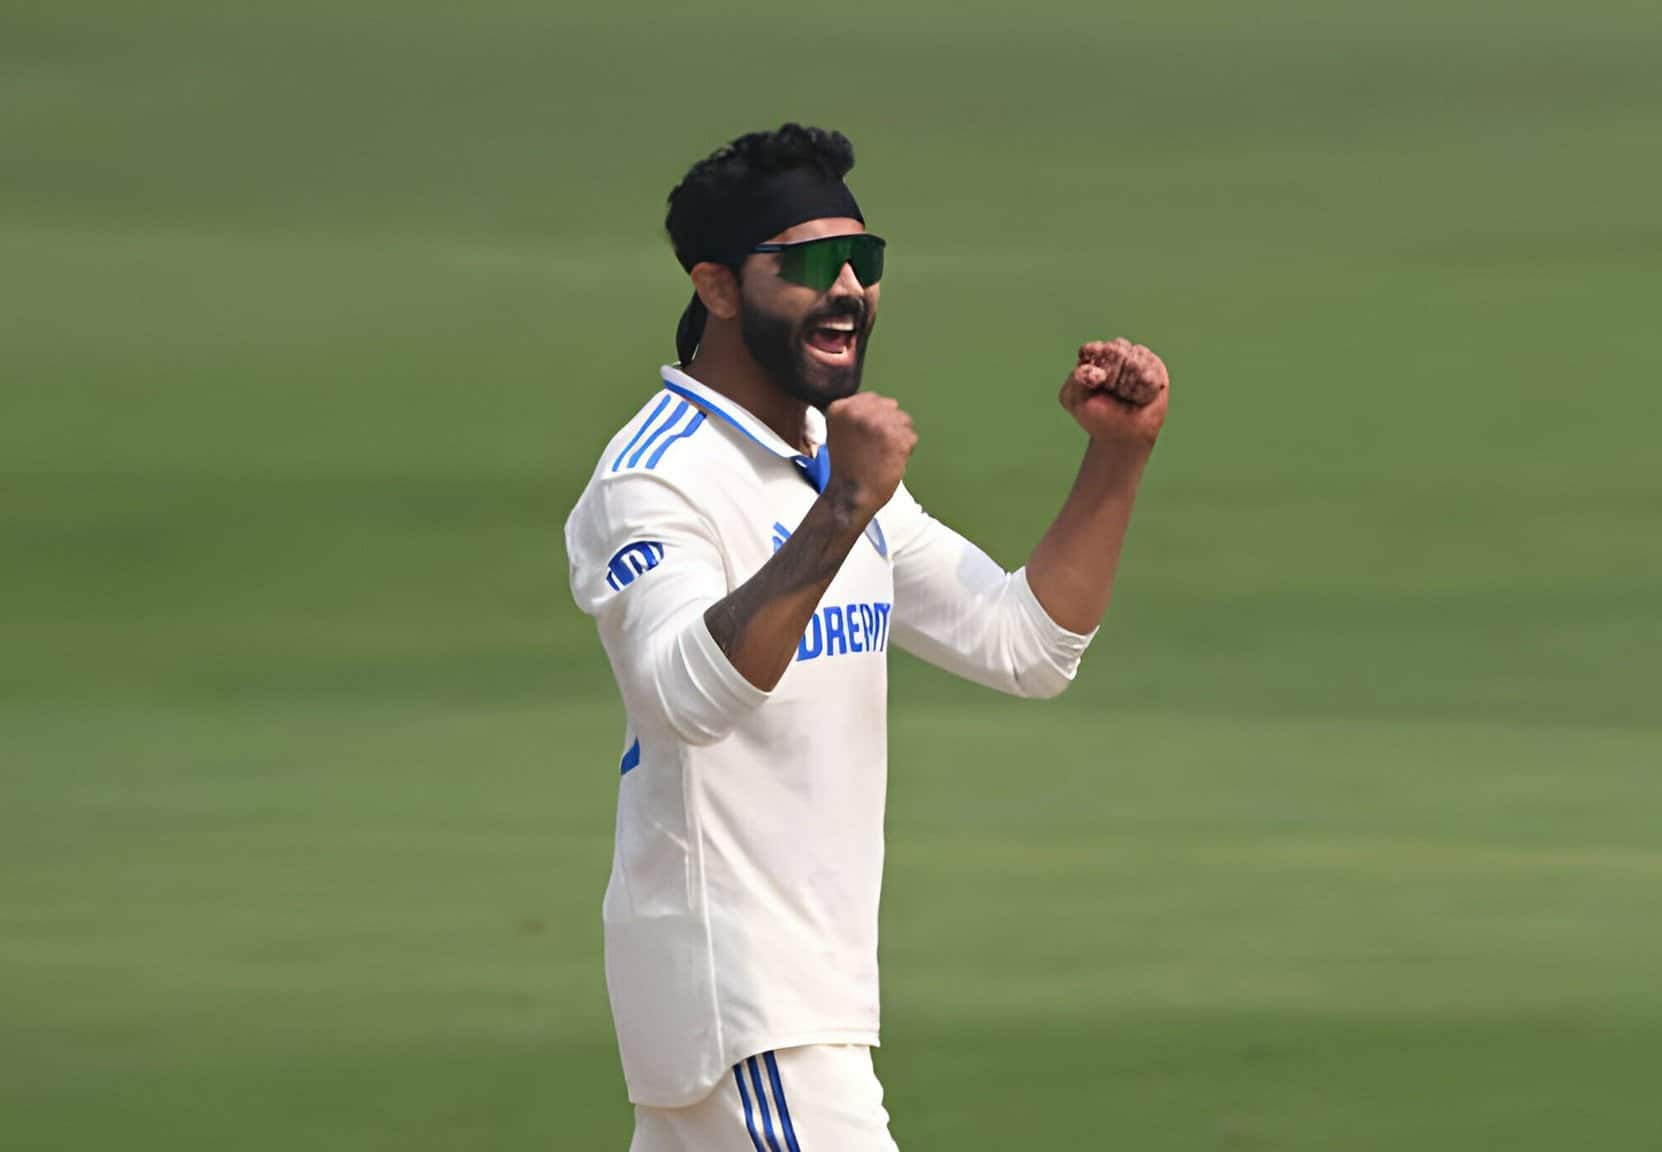 Why Is Ravindra Jadeja Not Playing Today?